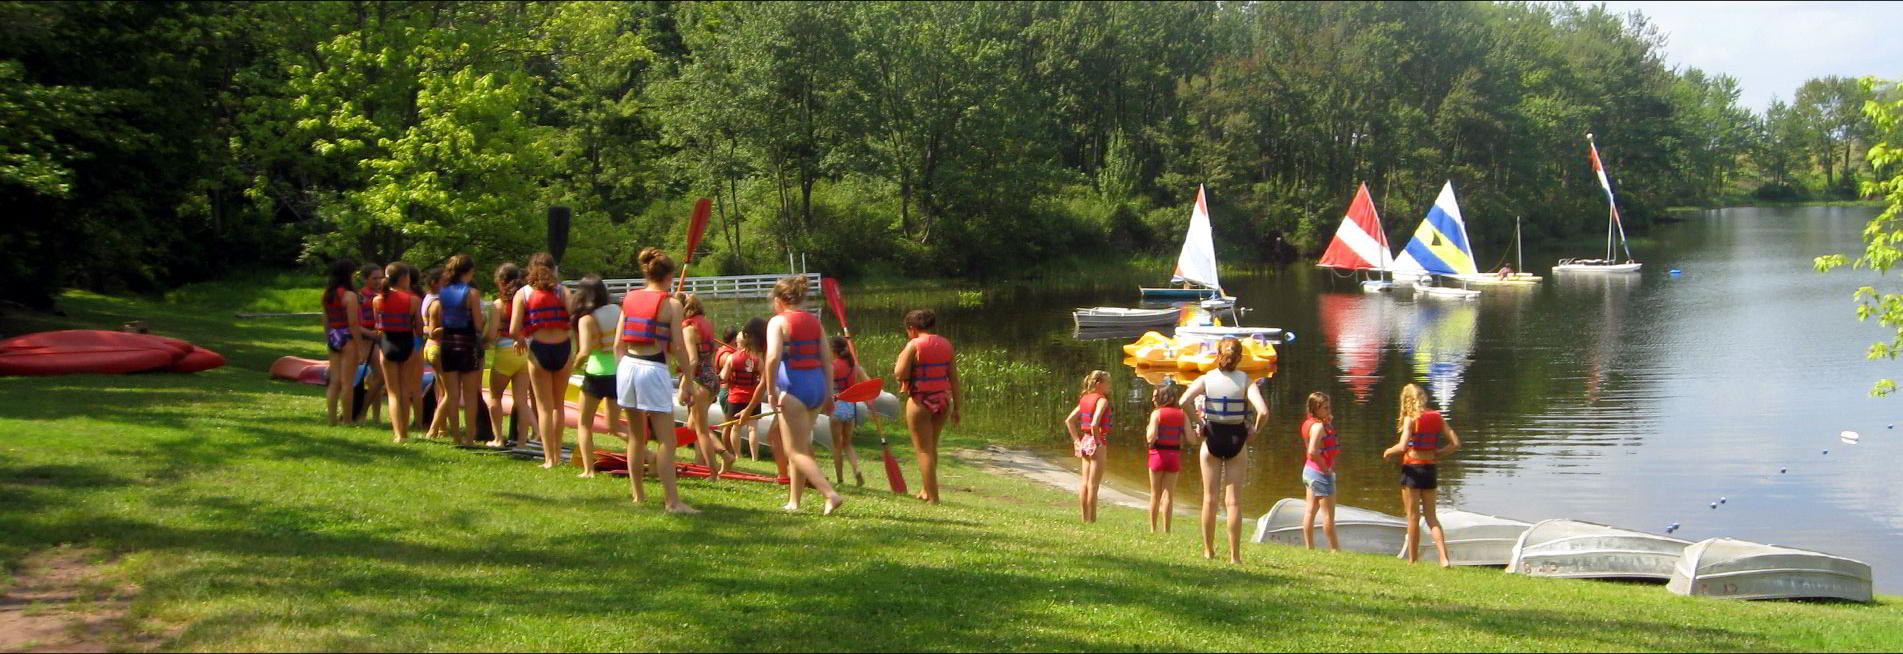 A summer camp scene by a lake with sail boats